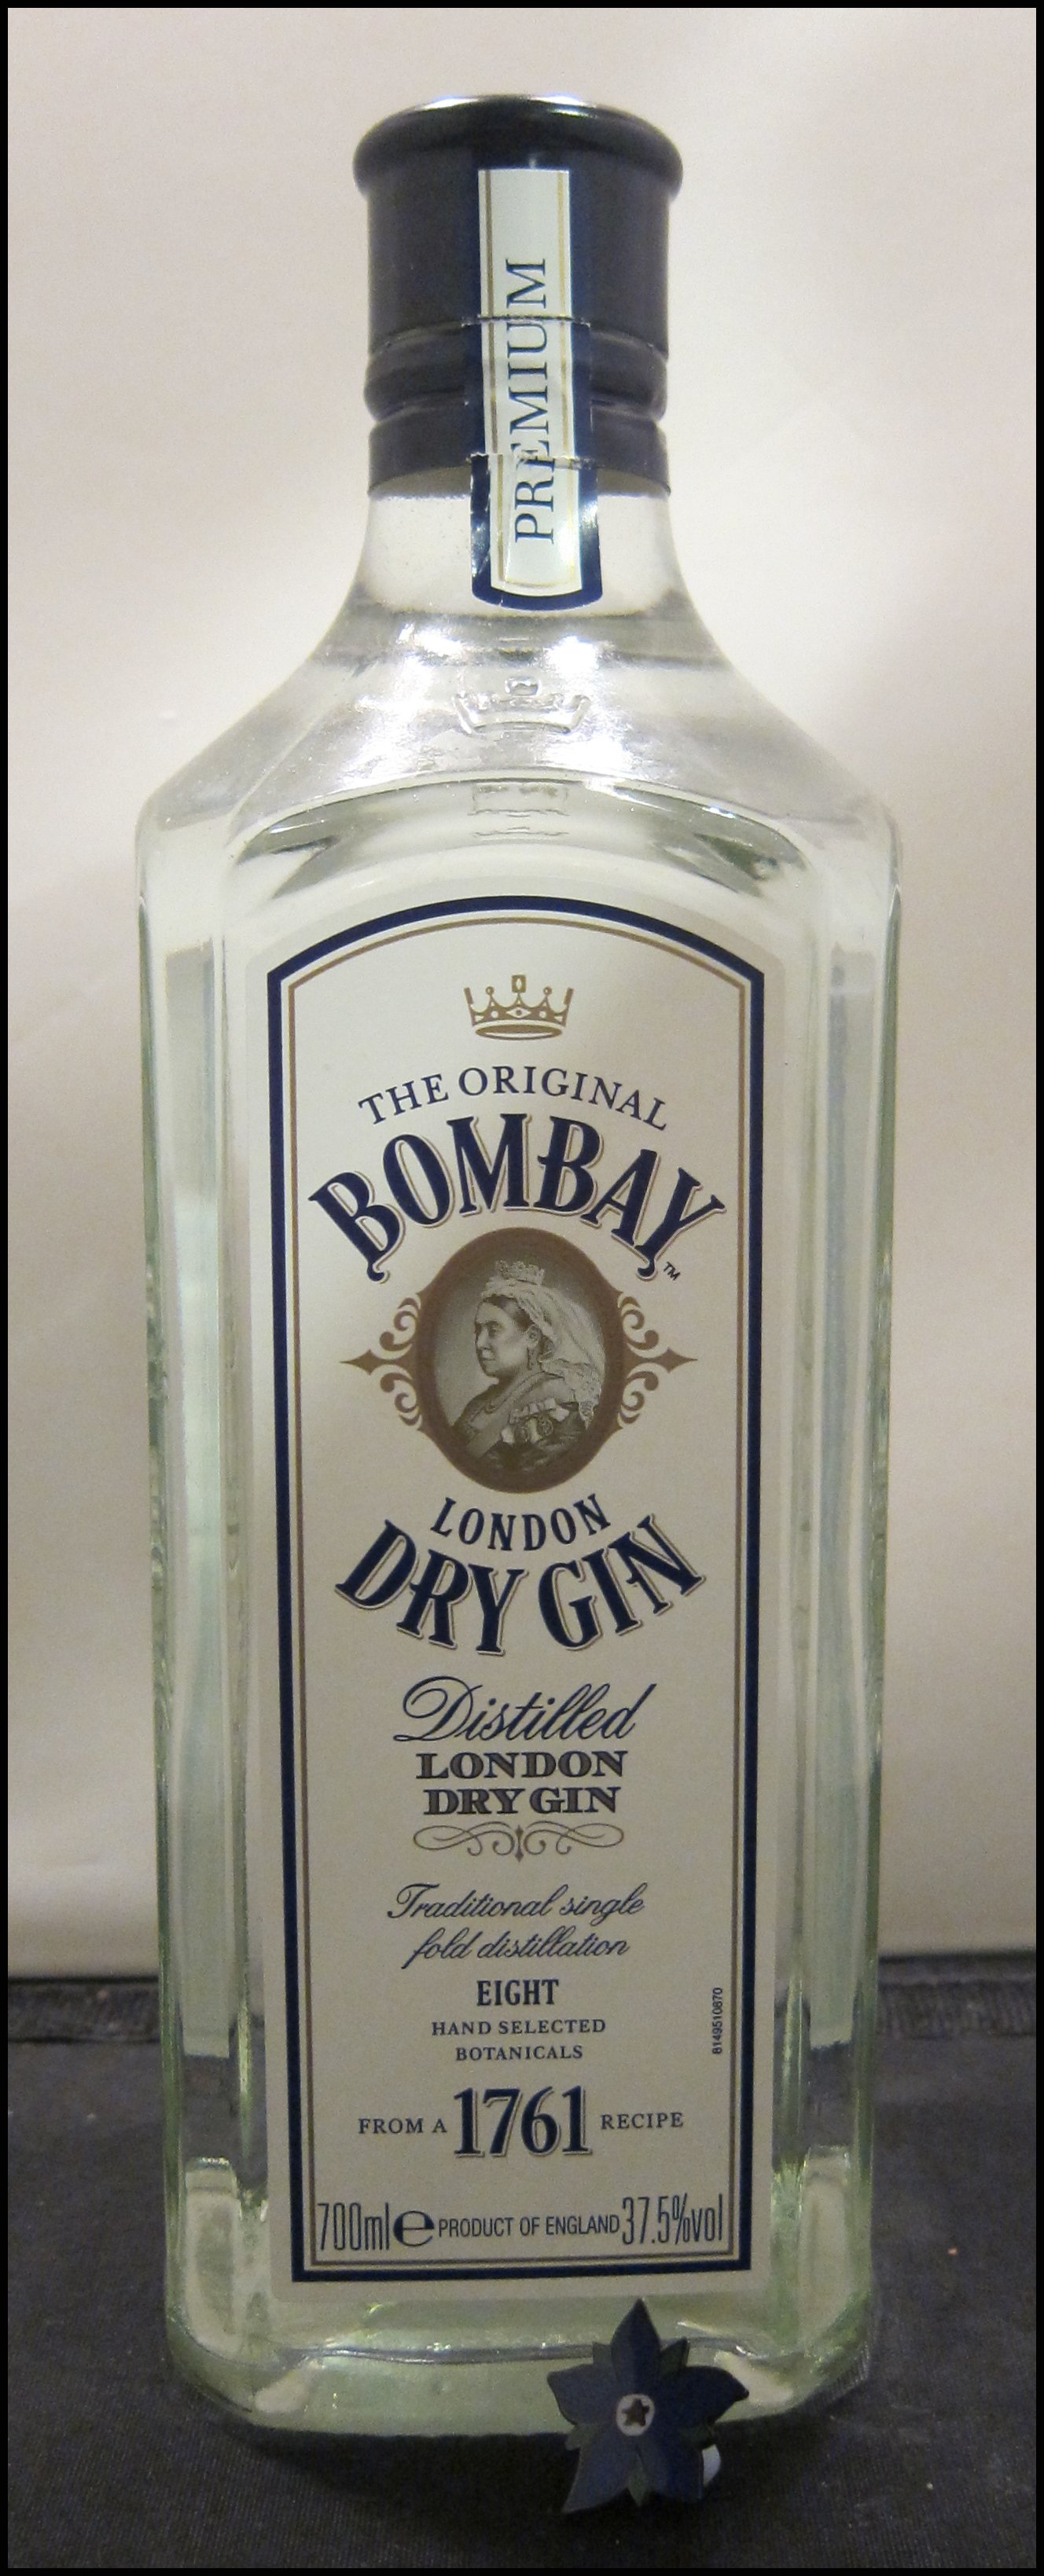 Cocktails with… Bombay Dry Gin (37.5% ABV) | Summer Fruit Cup